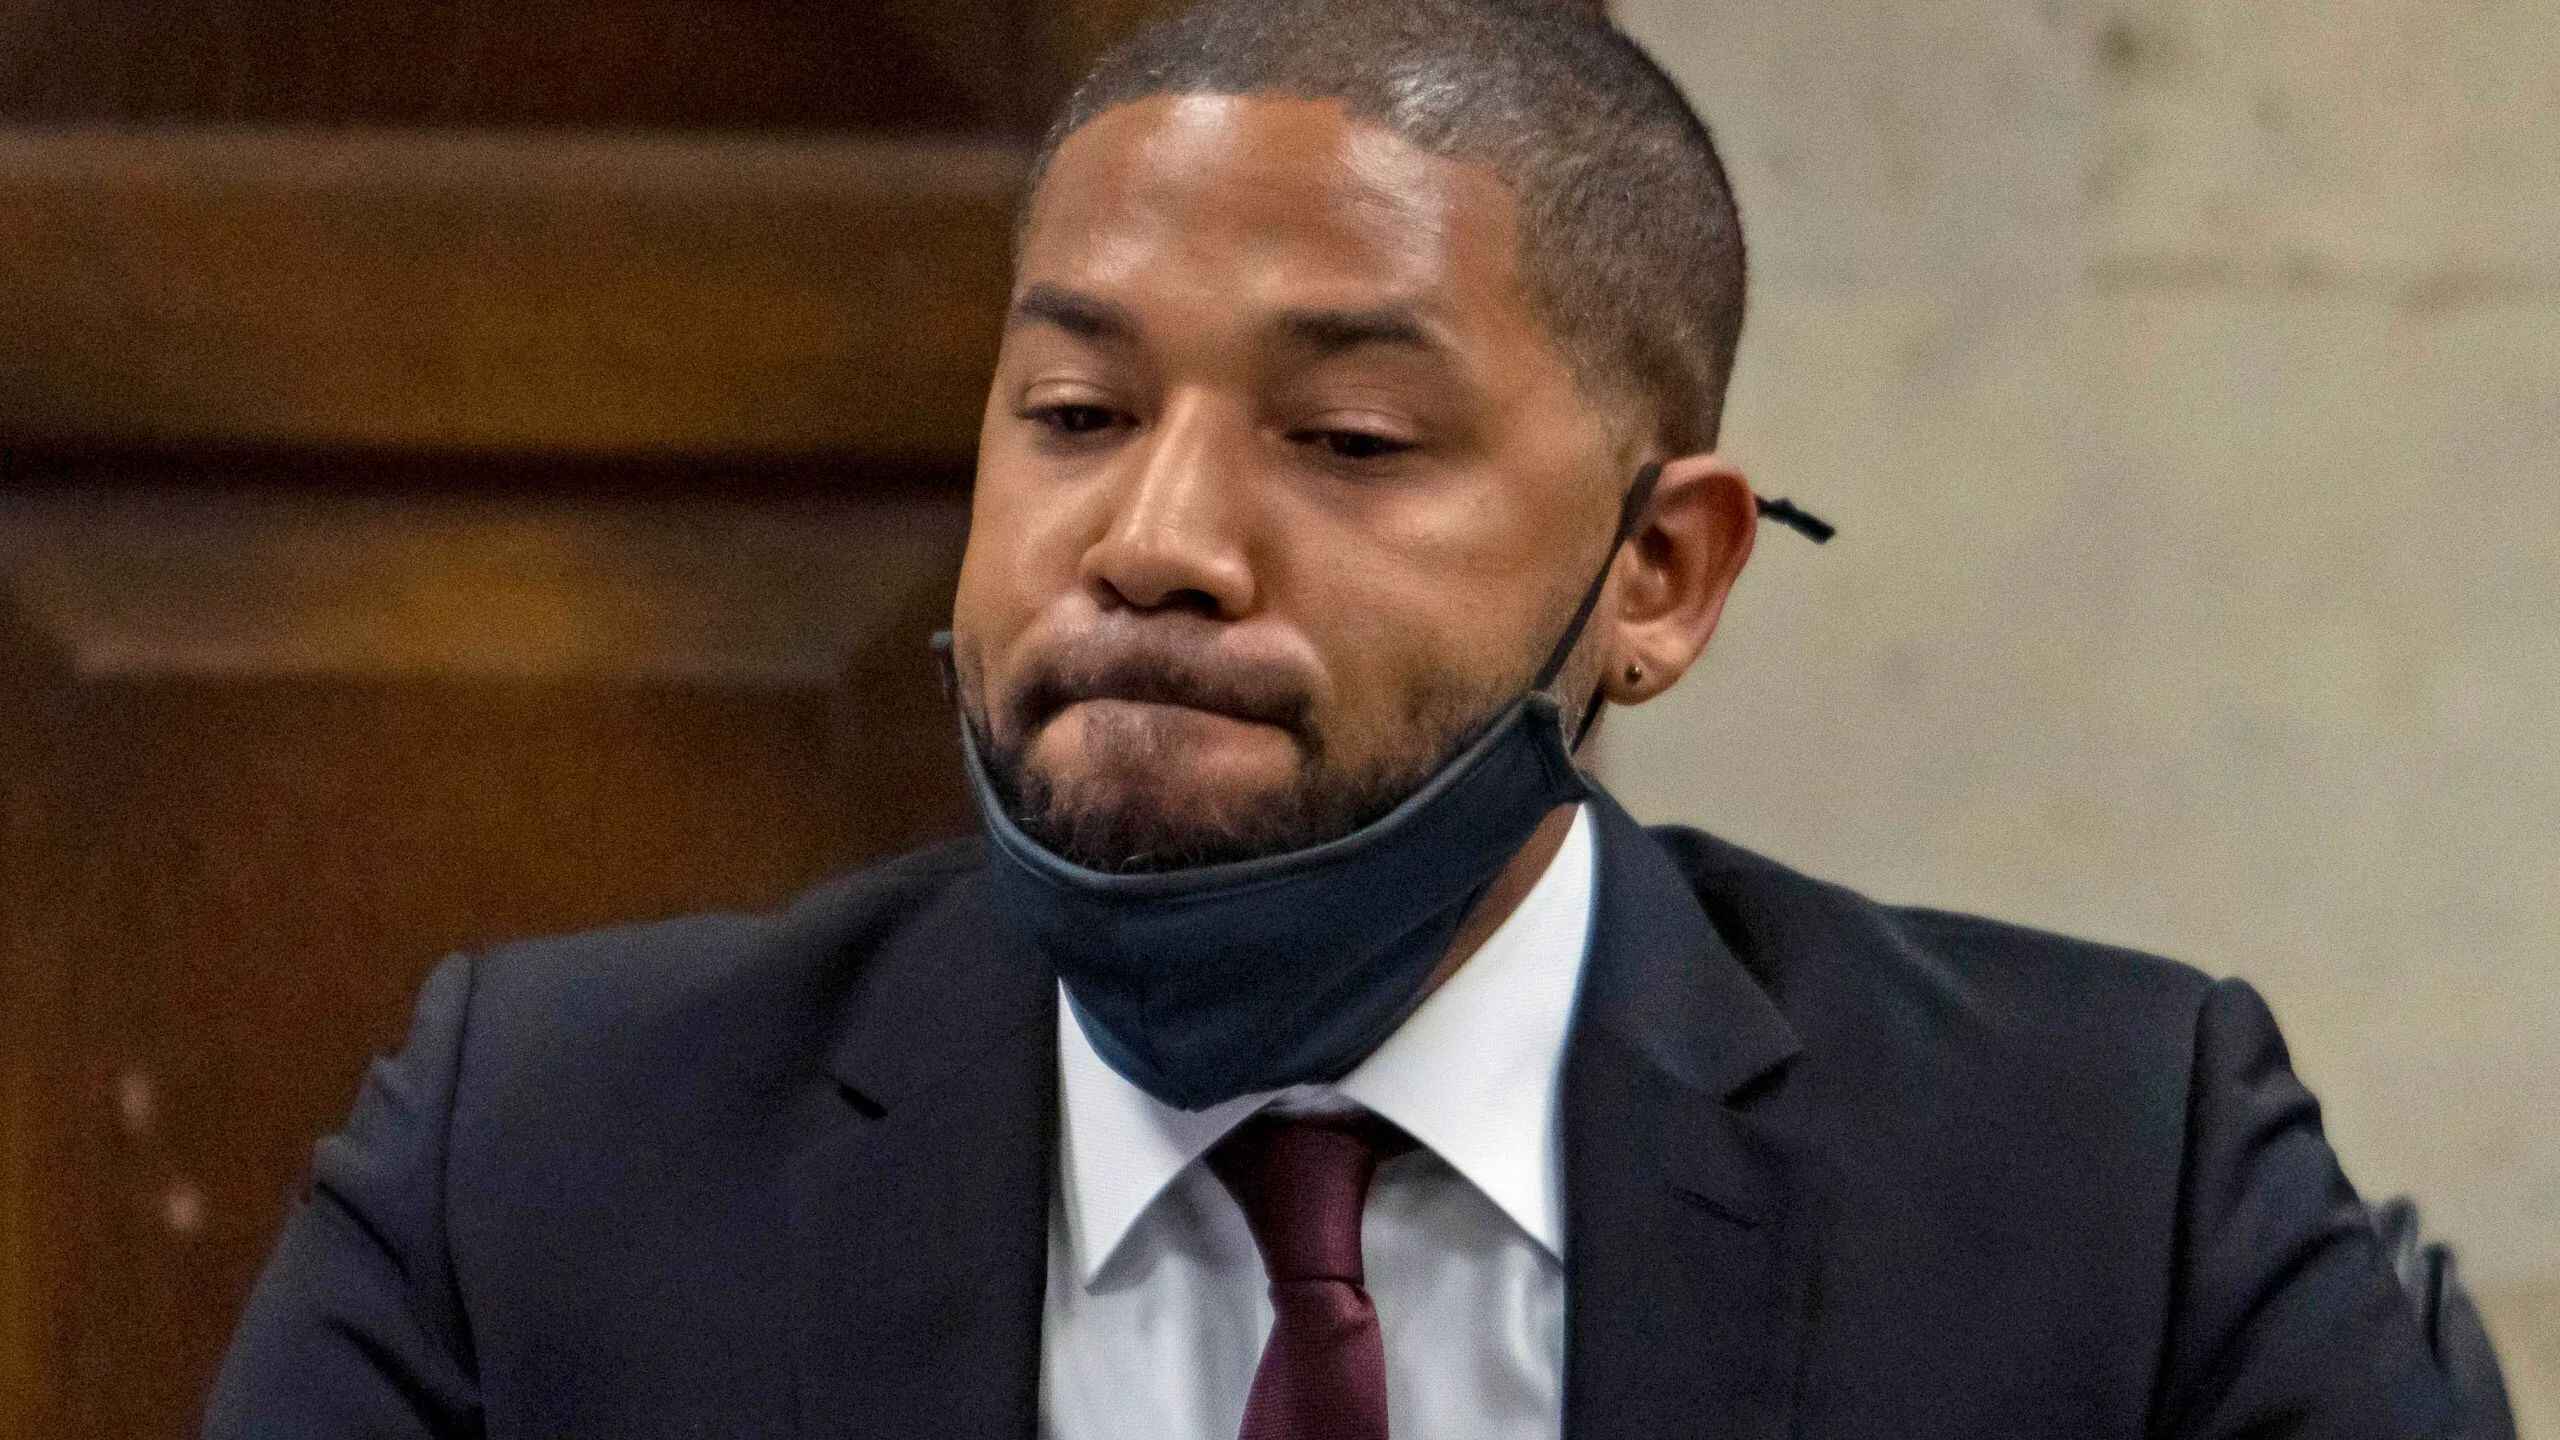 jussie-smolletts-conviction-upheld-but-jail-time-delayed